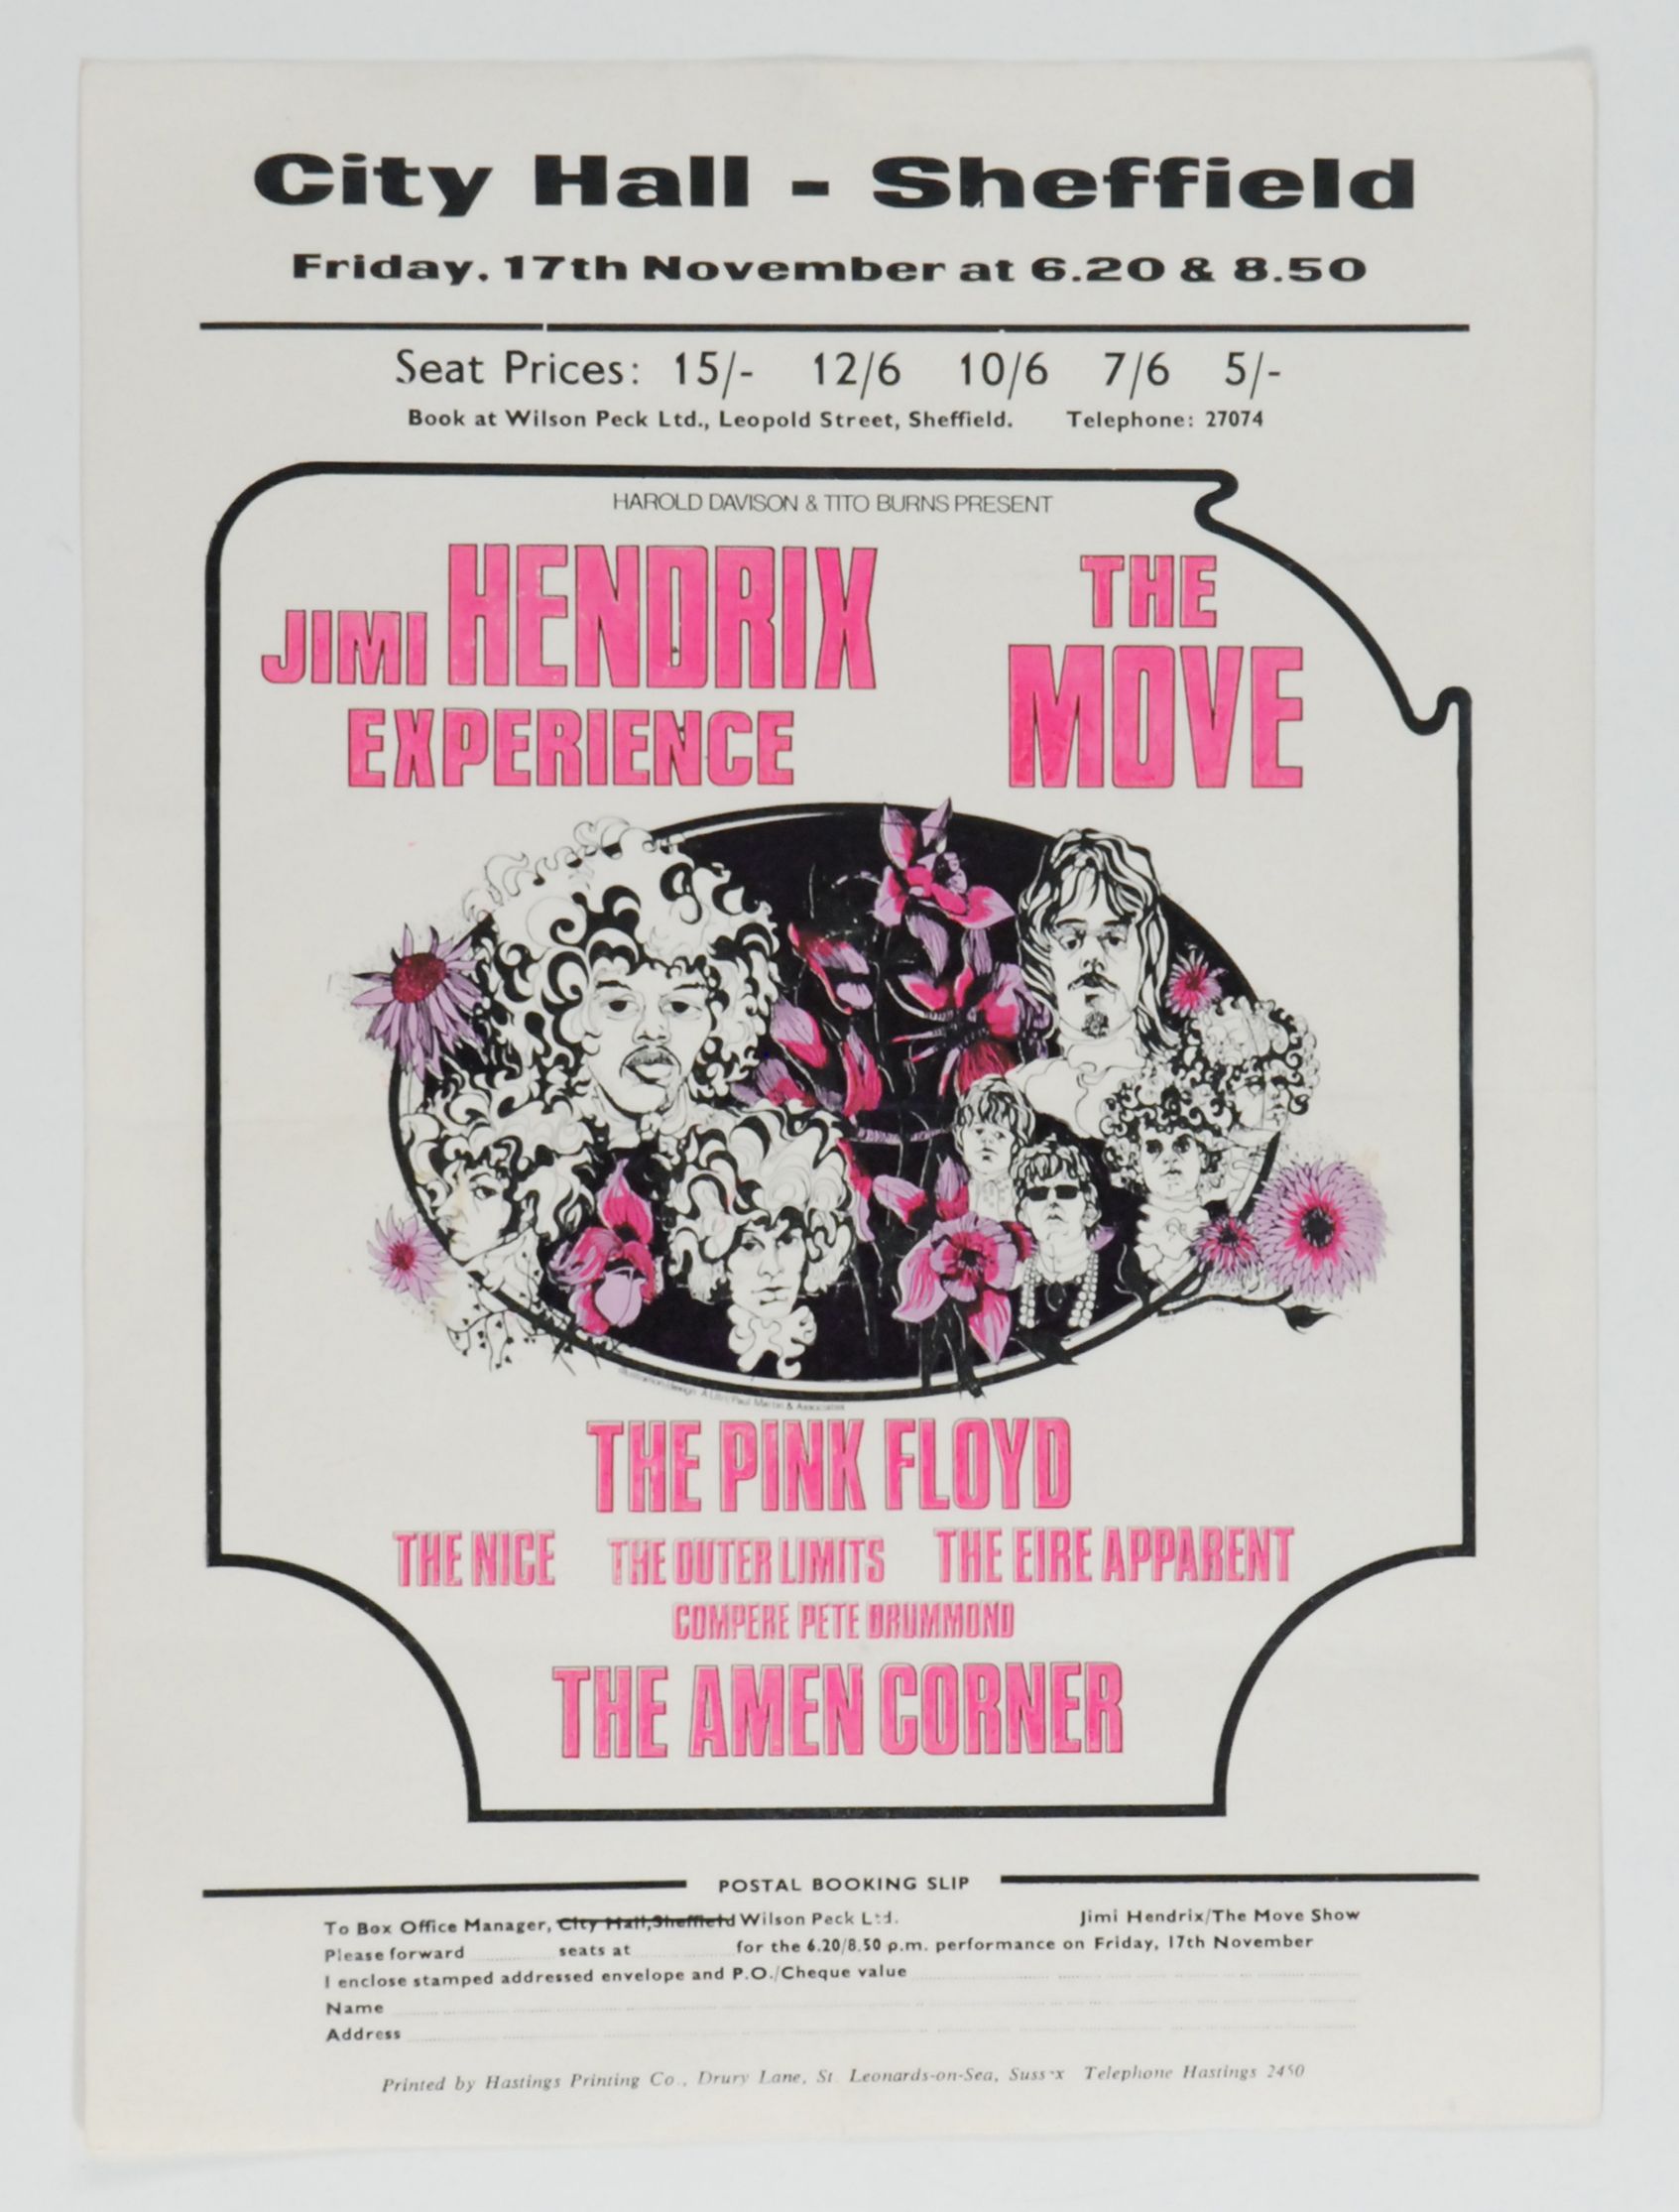 Jimi Hendrix Experience & Pink Floyd Sheffield City Hall 1967 Concert Poster